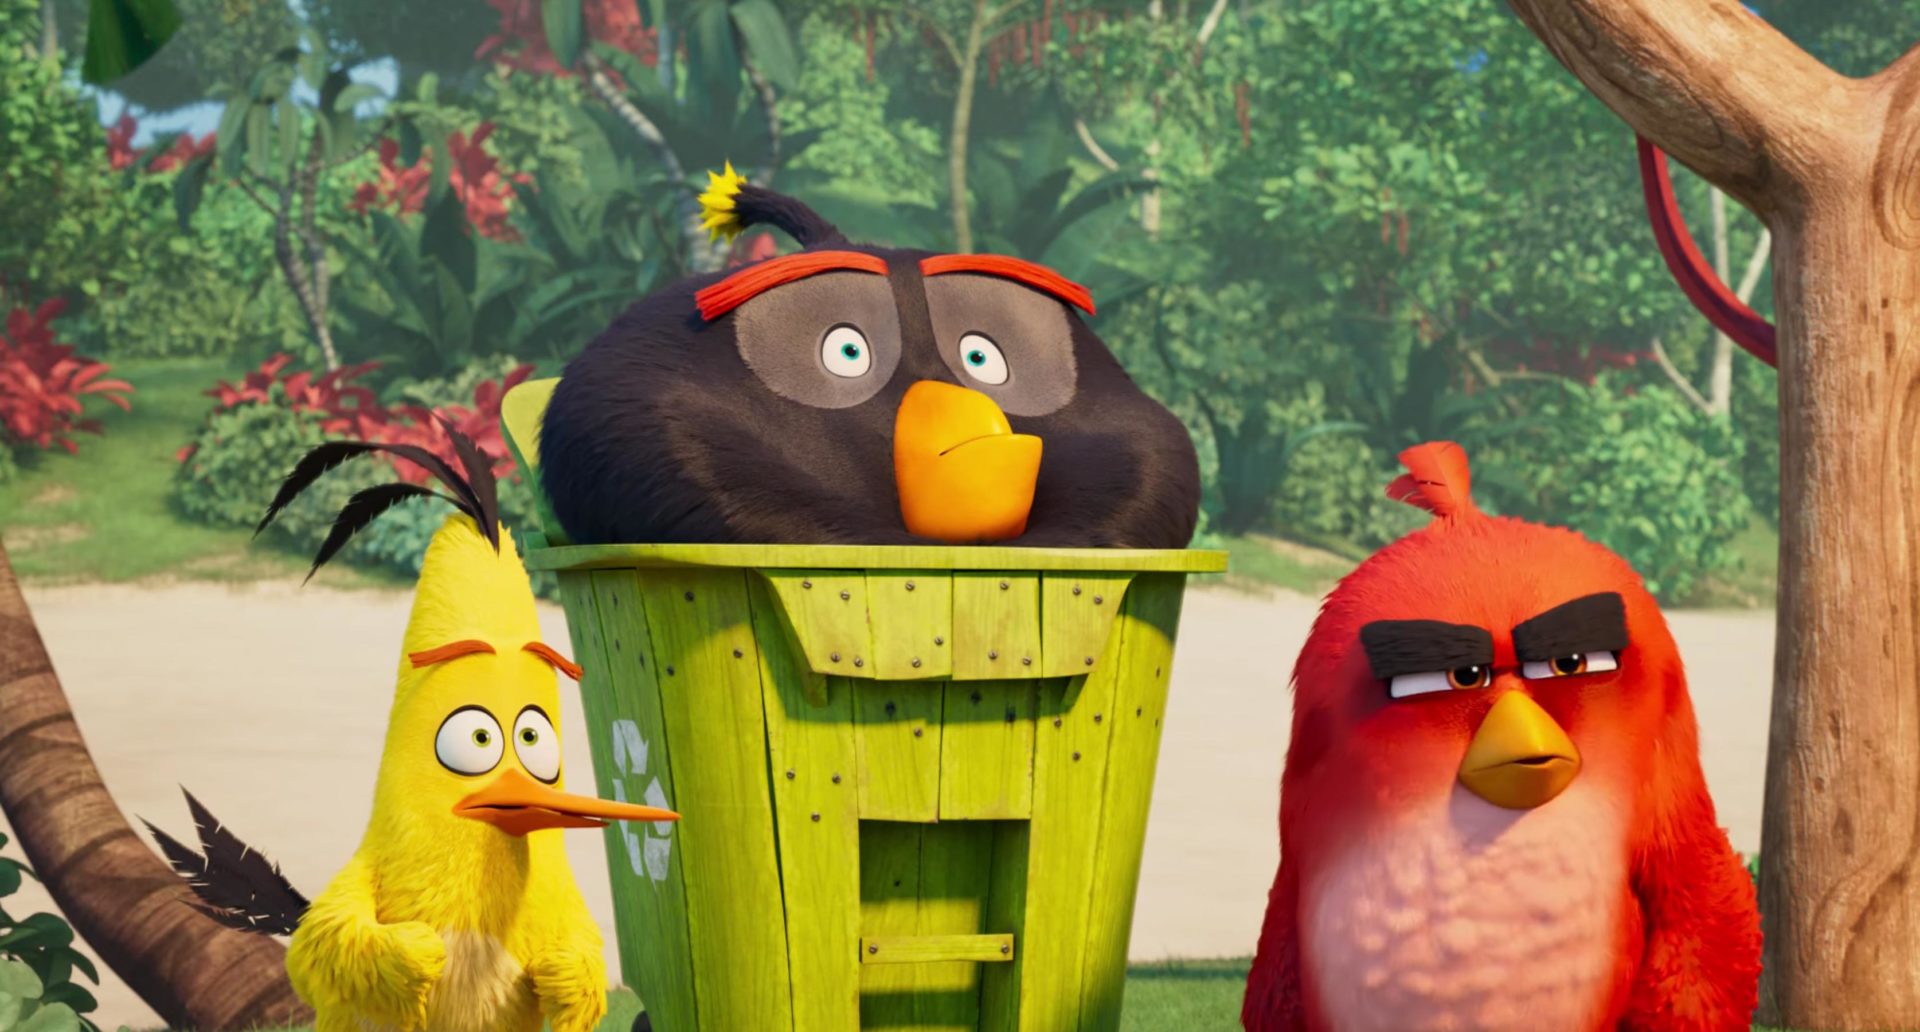 https://www.youtube.com/watch?v=egDqXpwKwnk
THE ANGRY BIRDS MOVIE 2 - Official Teaser Trailer (screen grab)
CR: Sony Pictures Entertainment